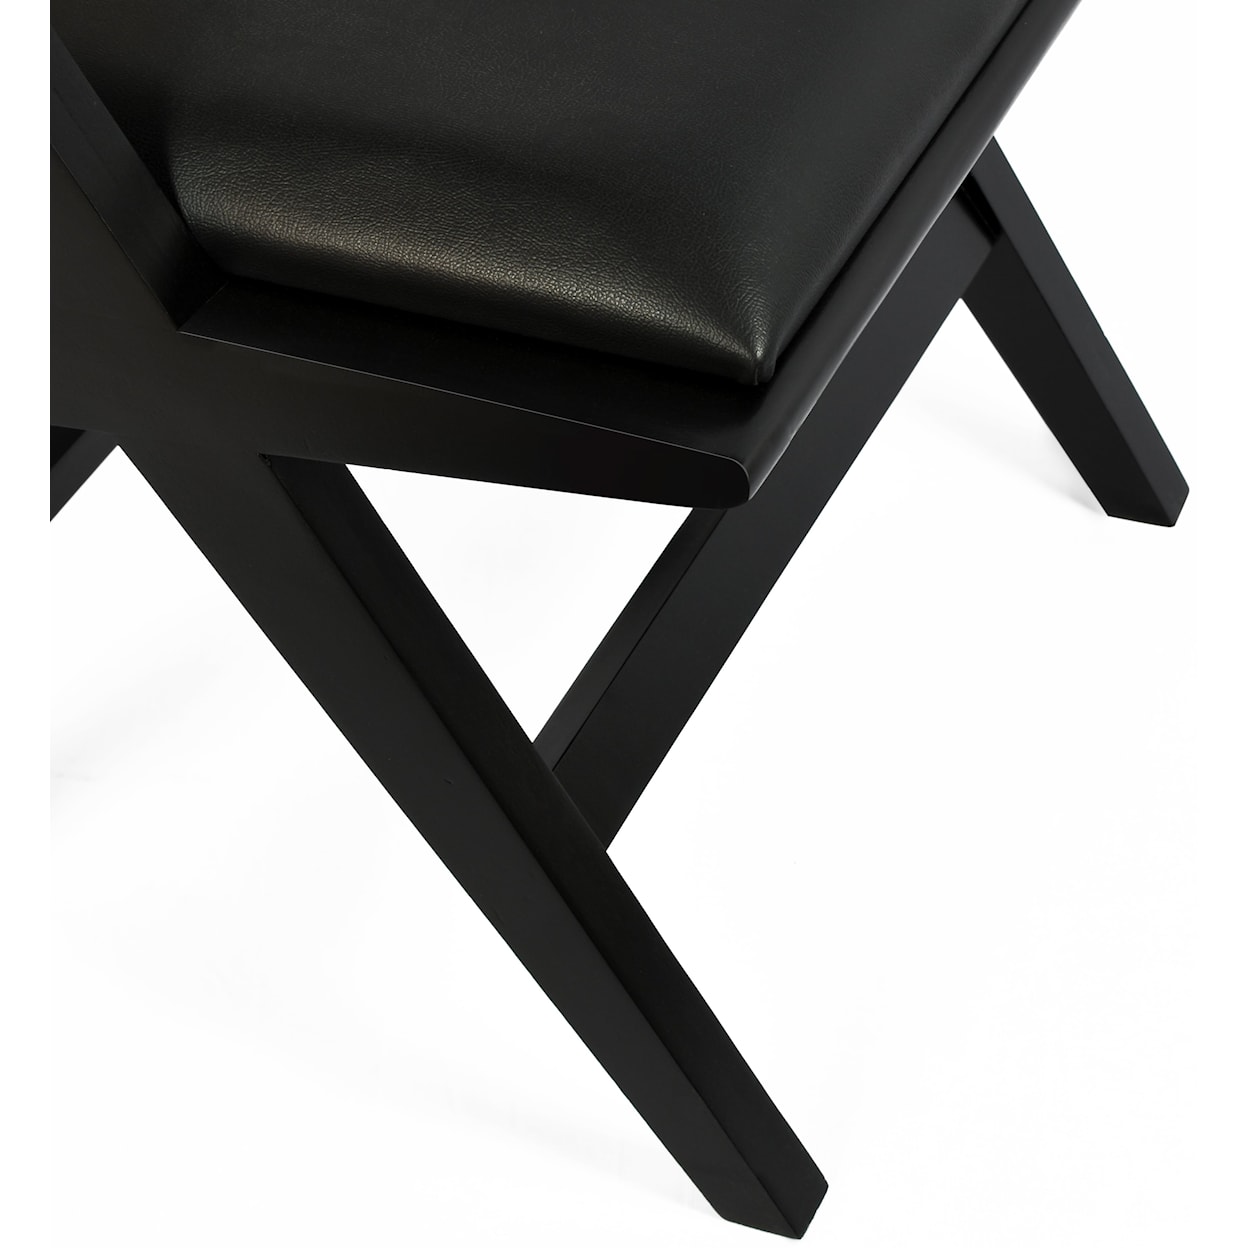 Meridian Furniture Abby Dining Arm Chair